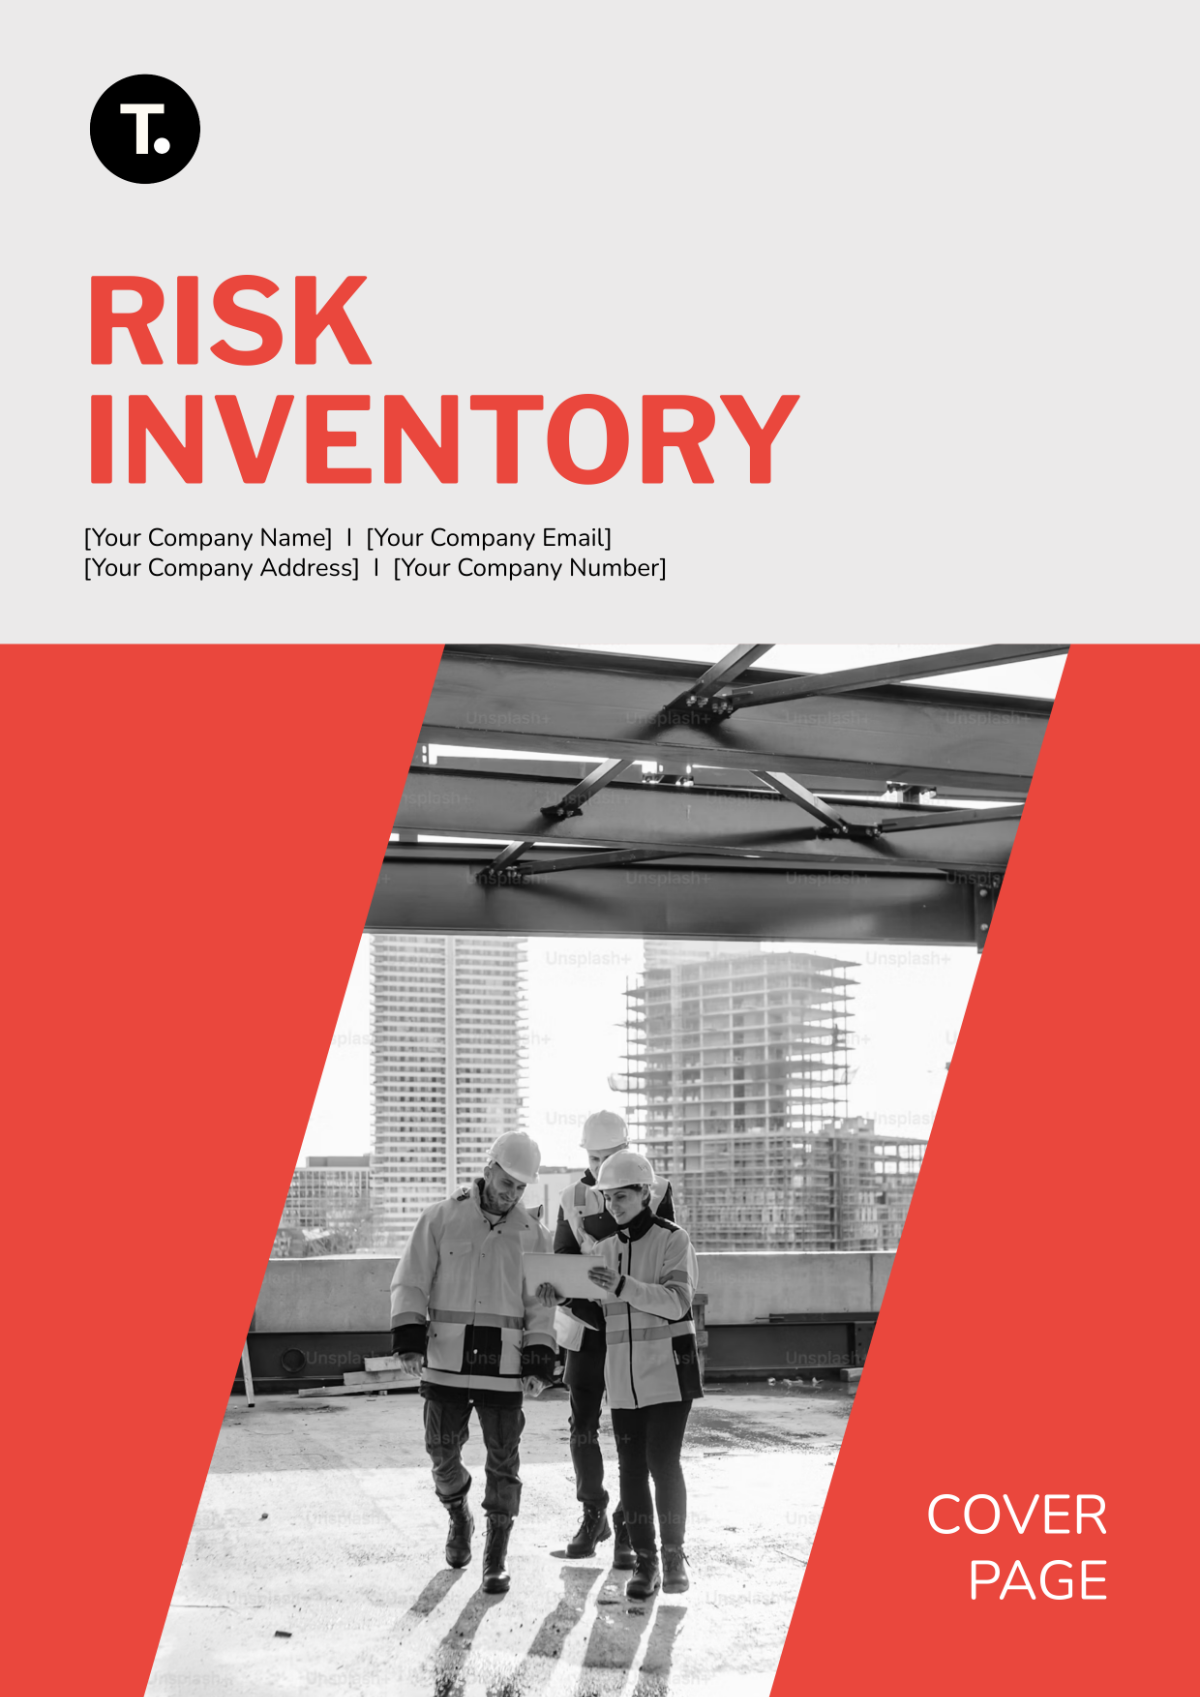 Risk Inventory Cover Page